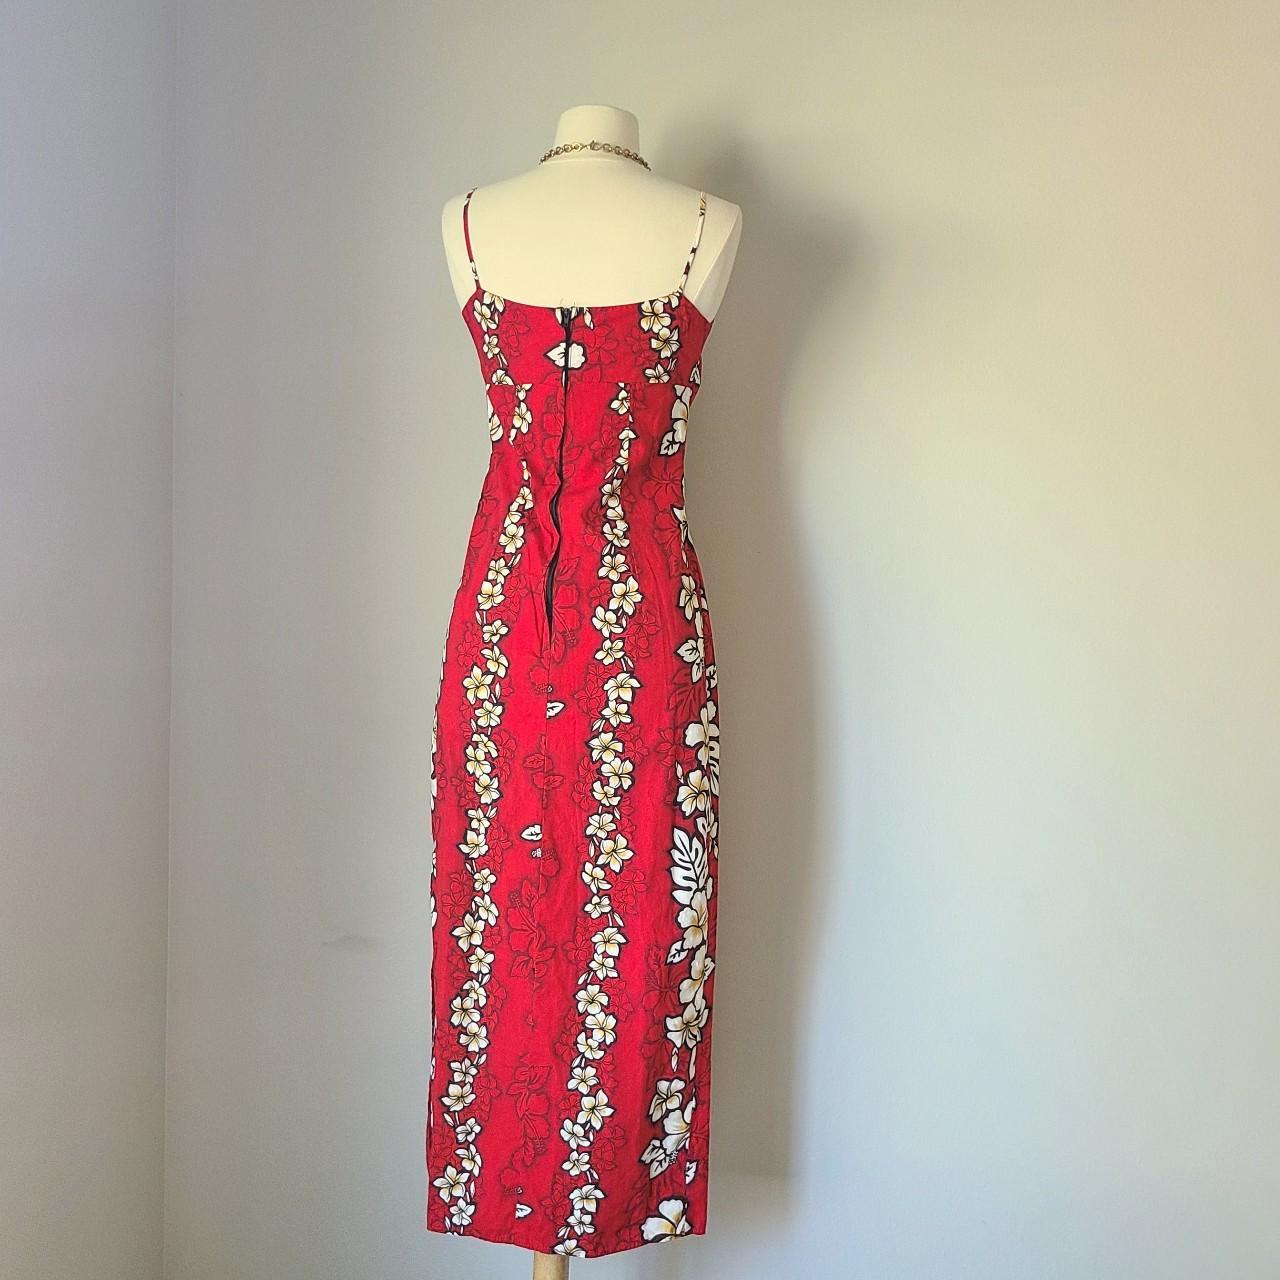 American Vintage Women's Red and White Dress (4)